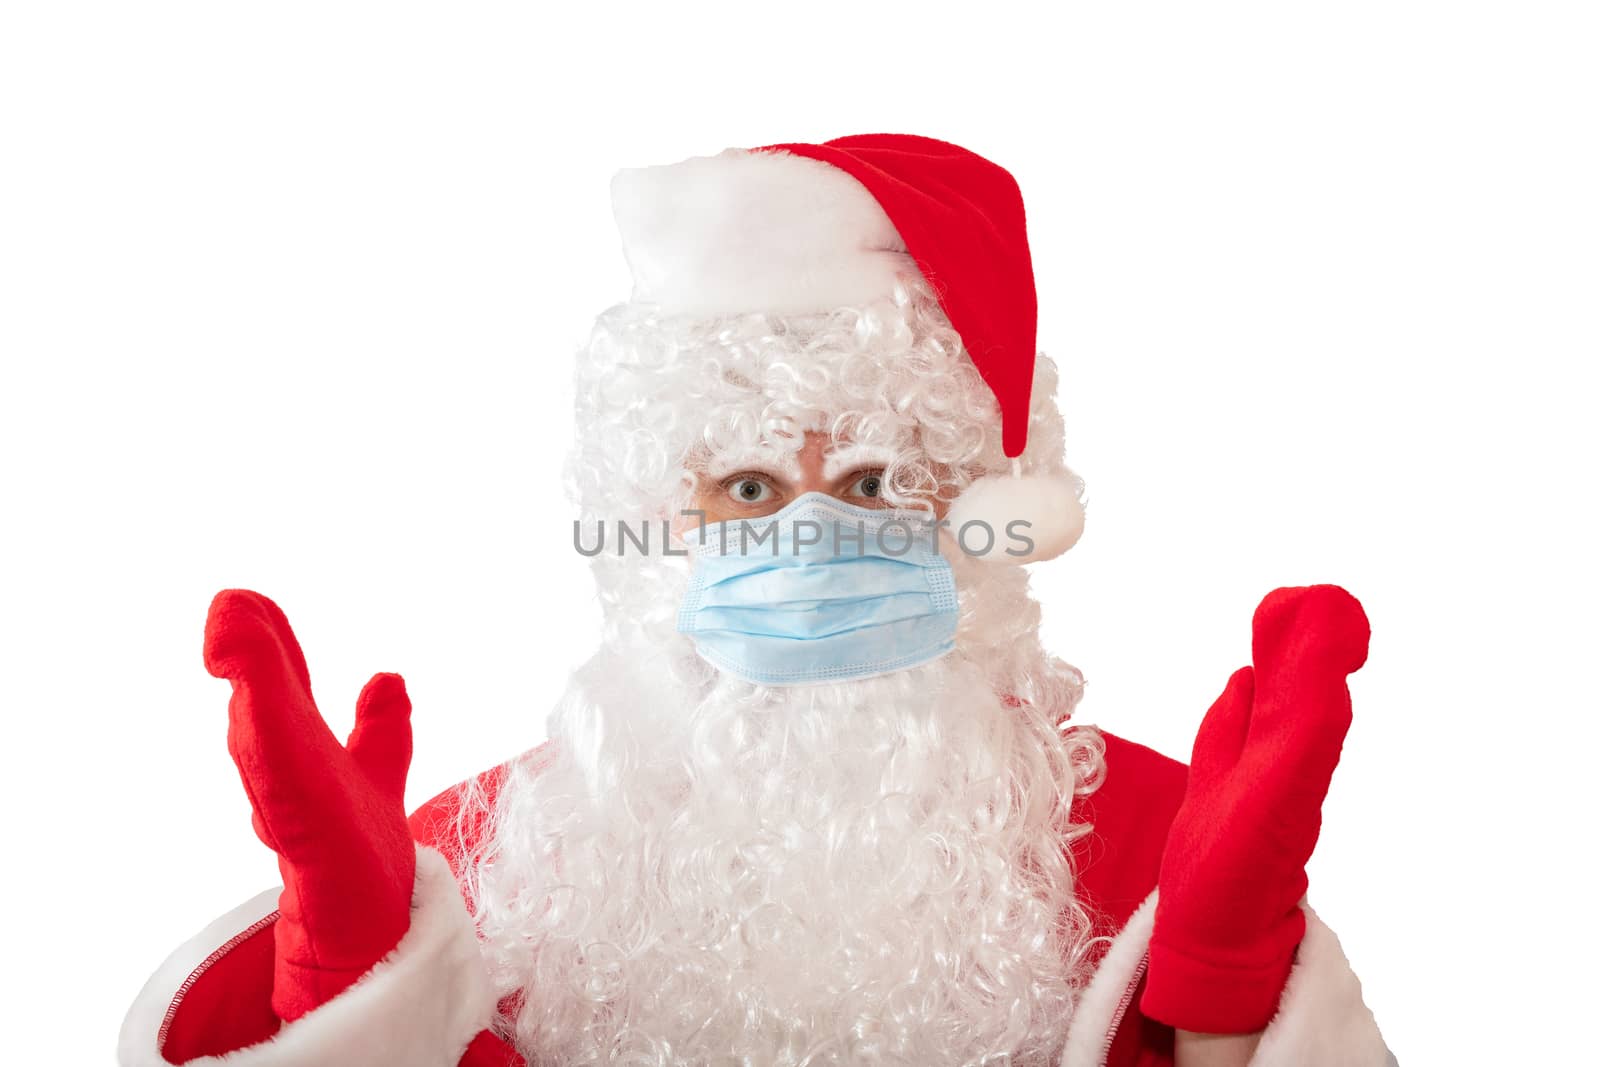 View of a man wearing a Santa Claus costume and medical mask with his arms and eyes wide open, isolated on white background. Man looks upset. New normal, new reality, pandemic holiday concepts by DamantisZ